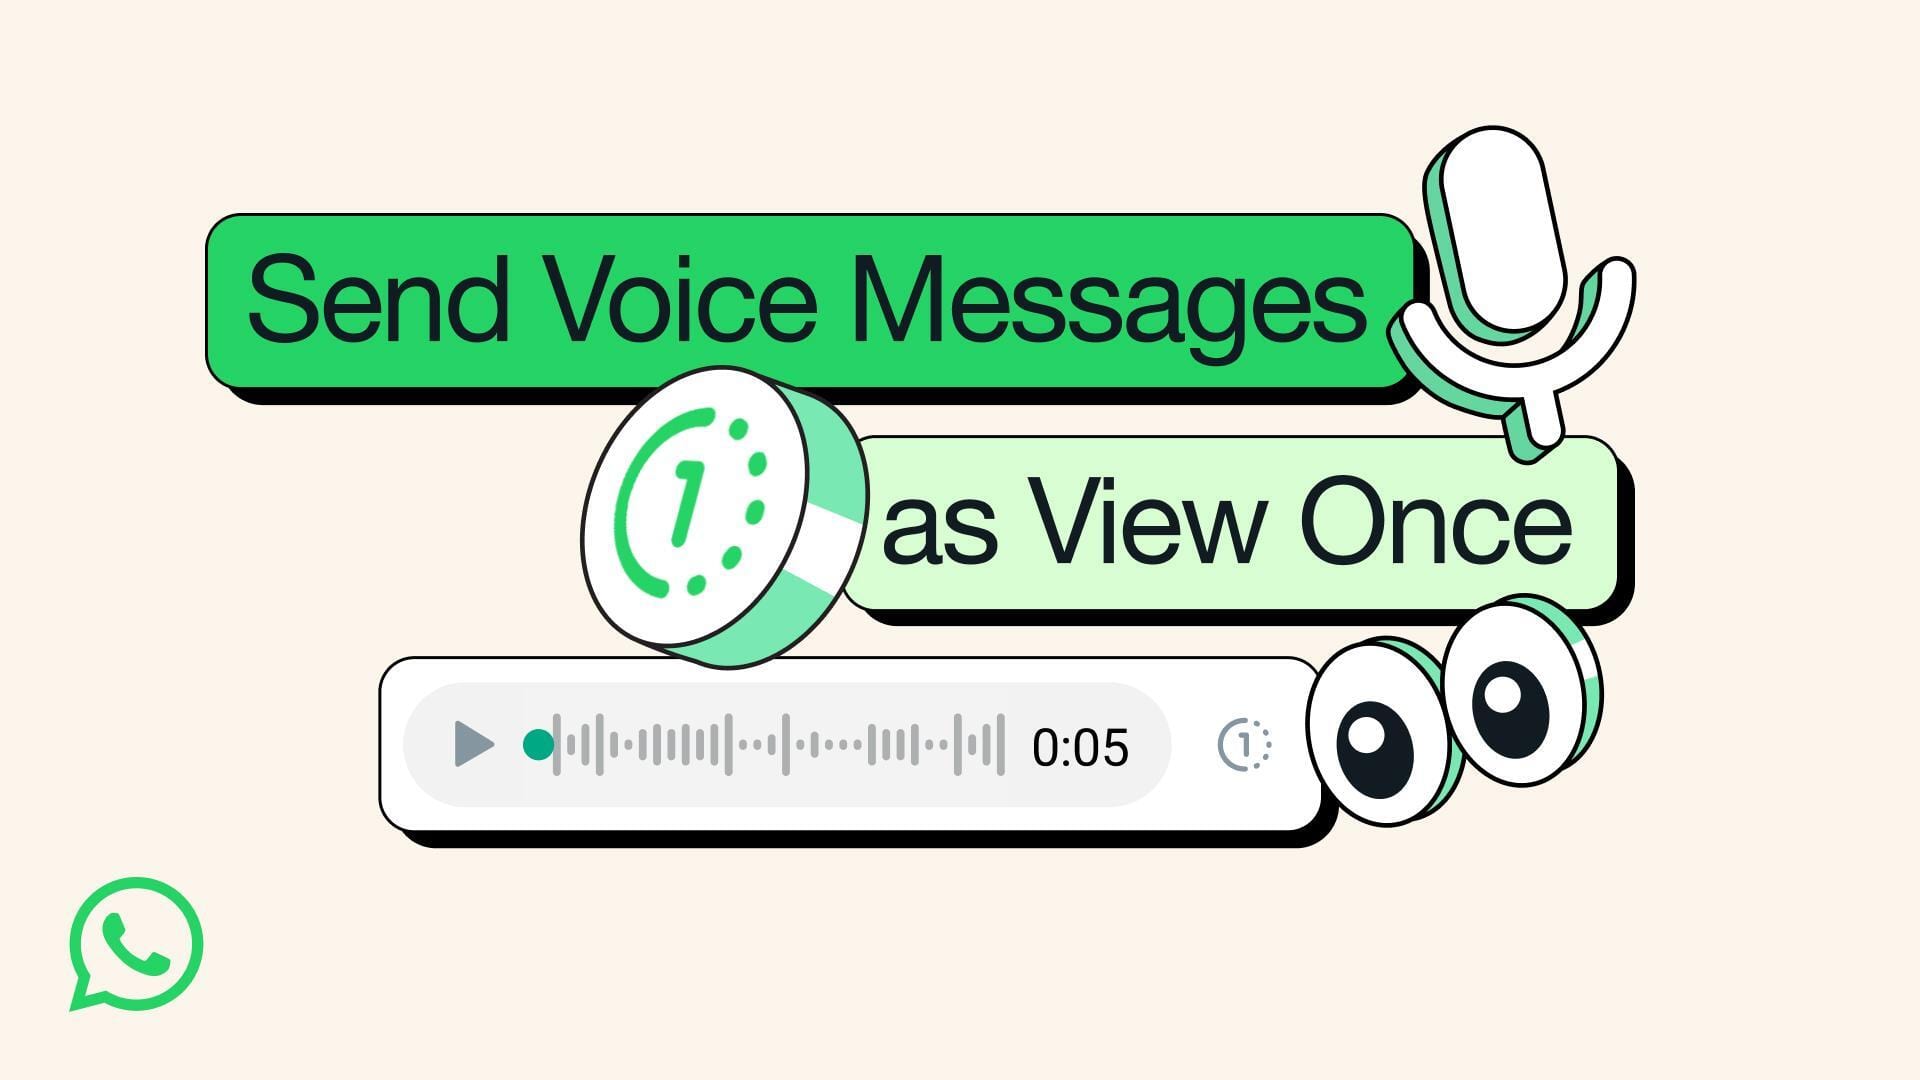 How to send self-destructing voice messages on WhatsApp